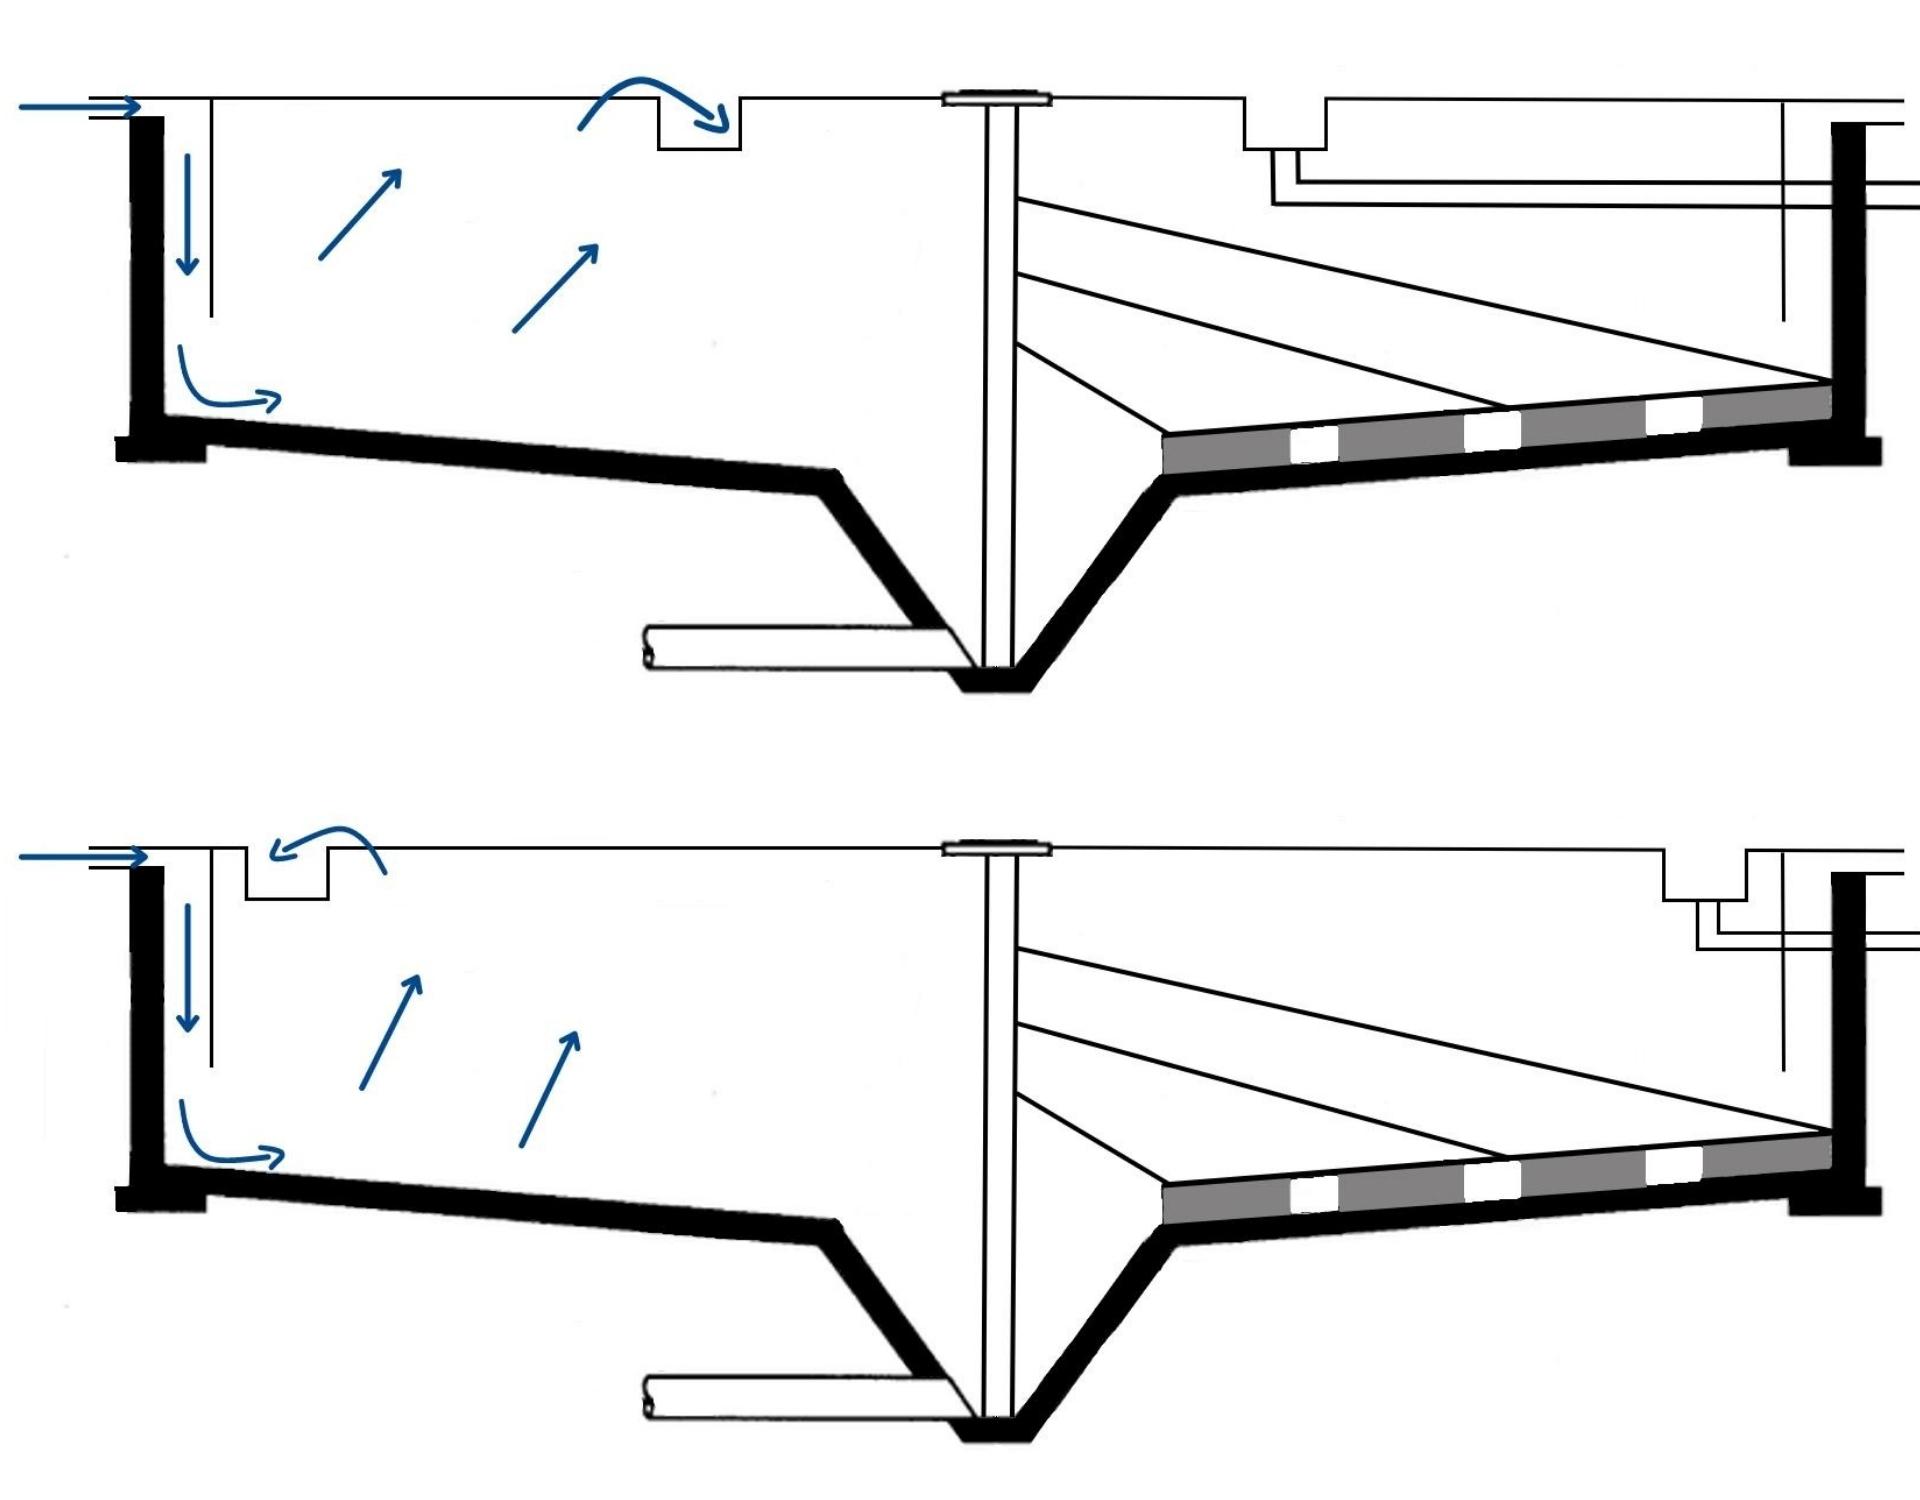 Digital cross section drawings of a circular clarifiers with peripheral influent but one has center effluent weirs while the other has peripheral effluent weirs.